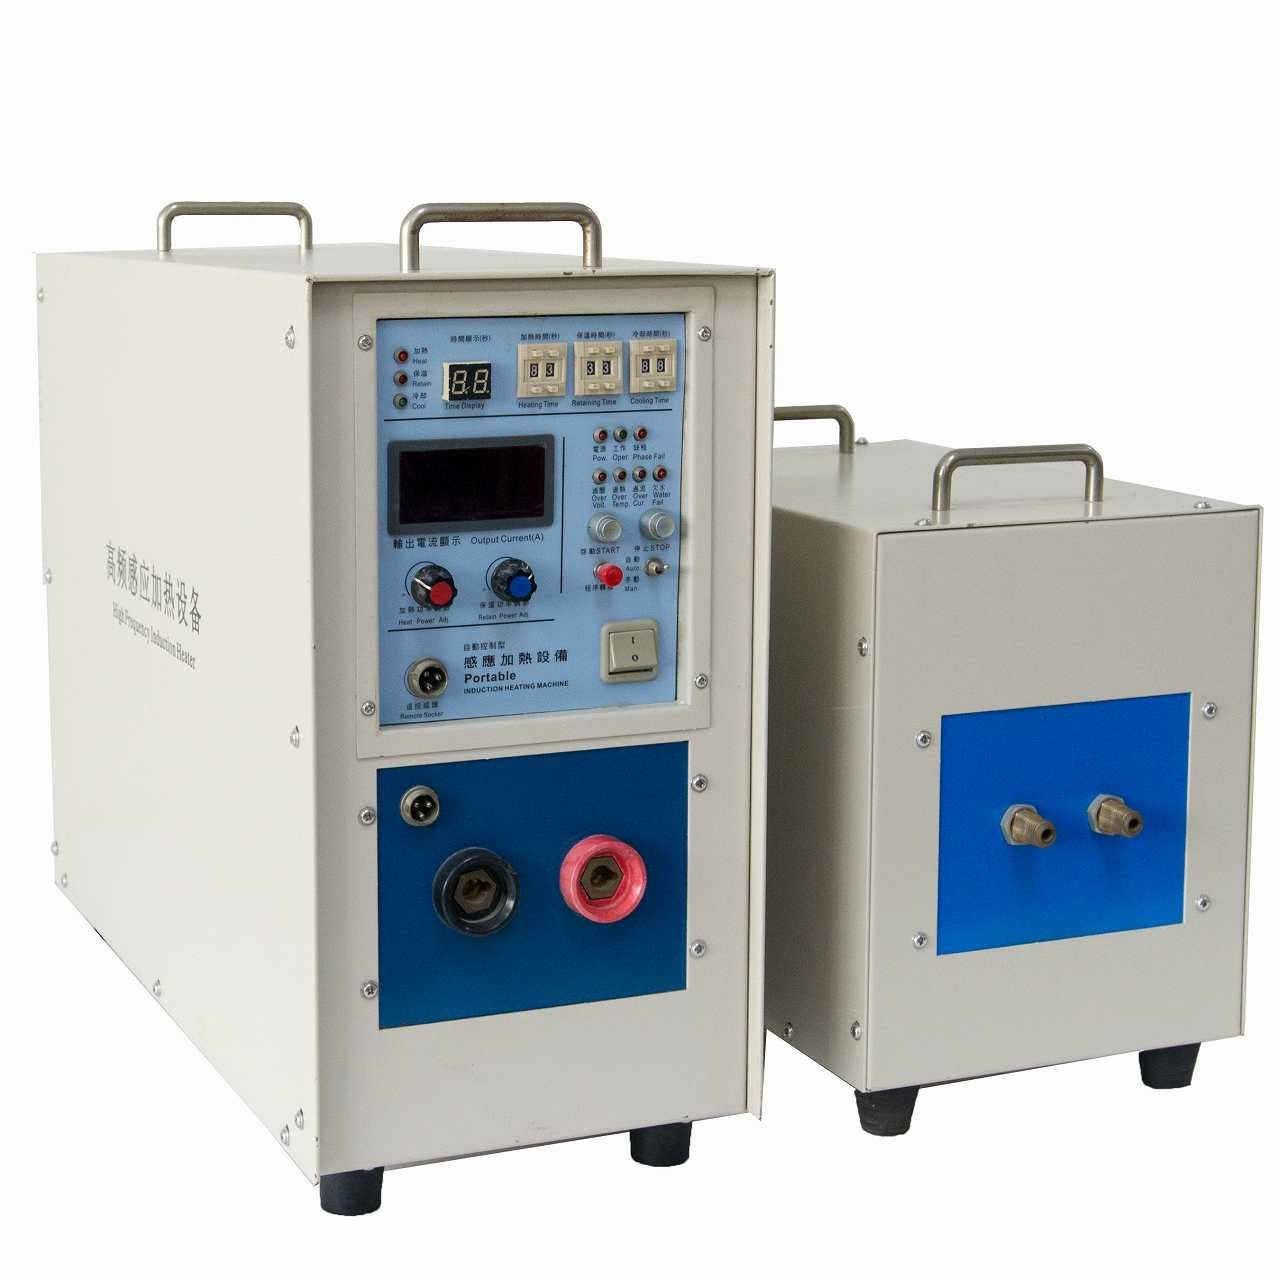 25kva High Frequency Induction Heater DDFT-25